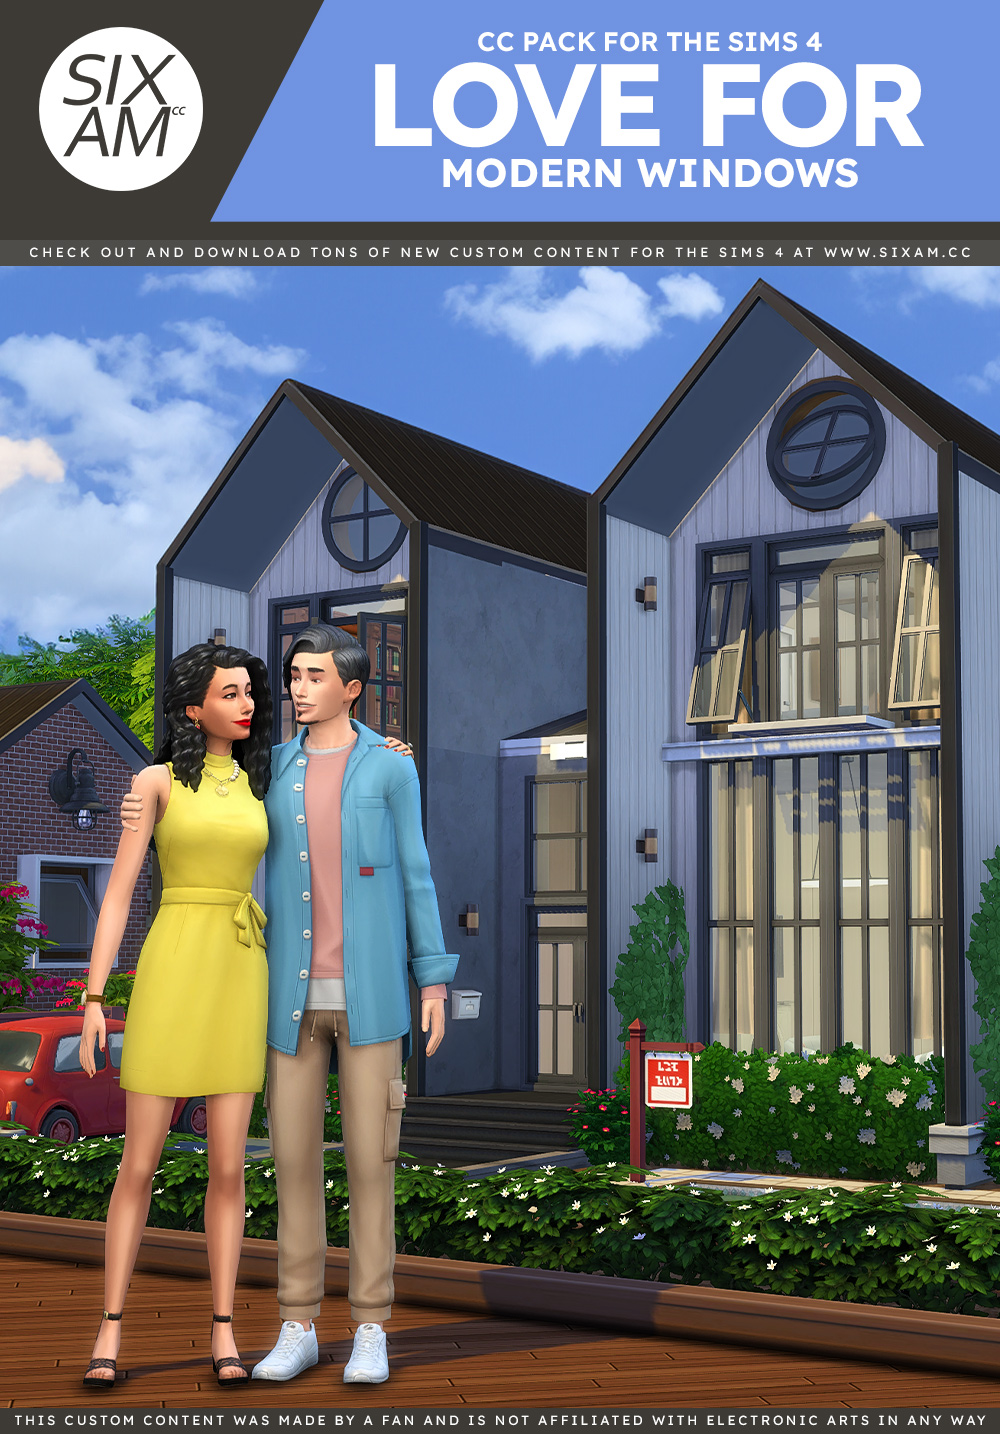 Love for Modern Windows (CC Pack for The Sims 4)